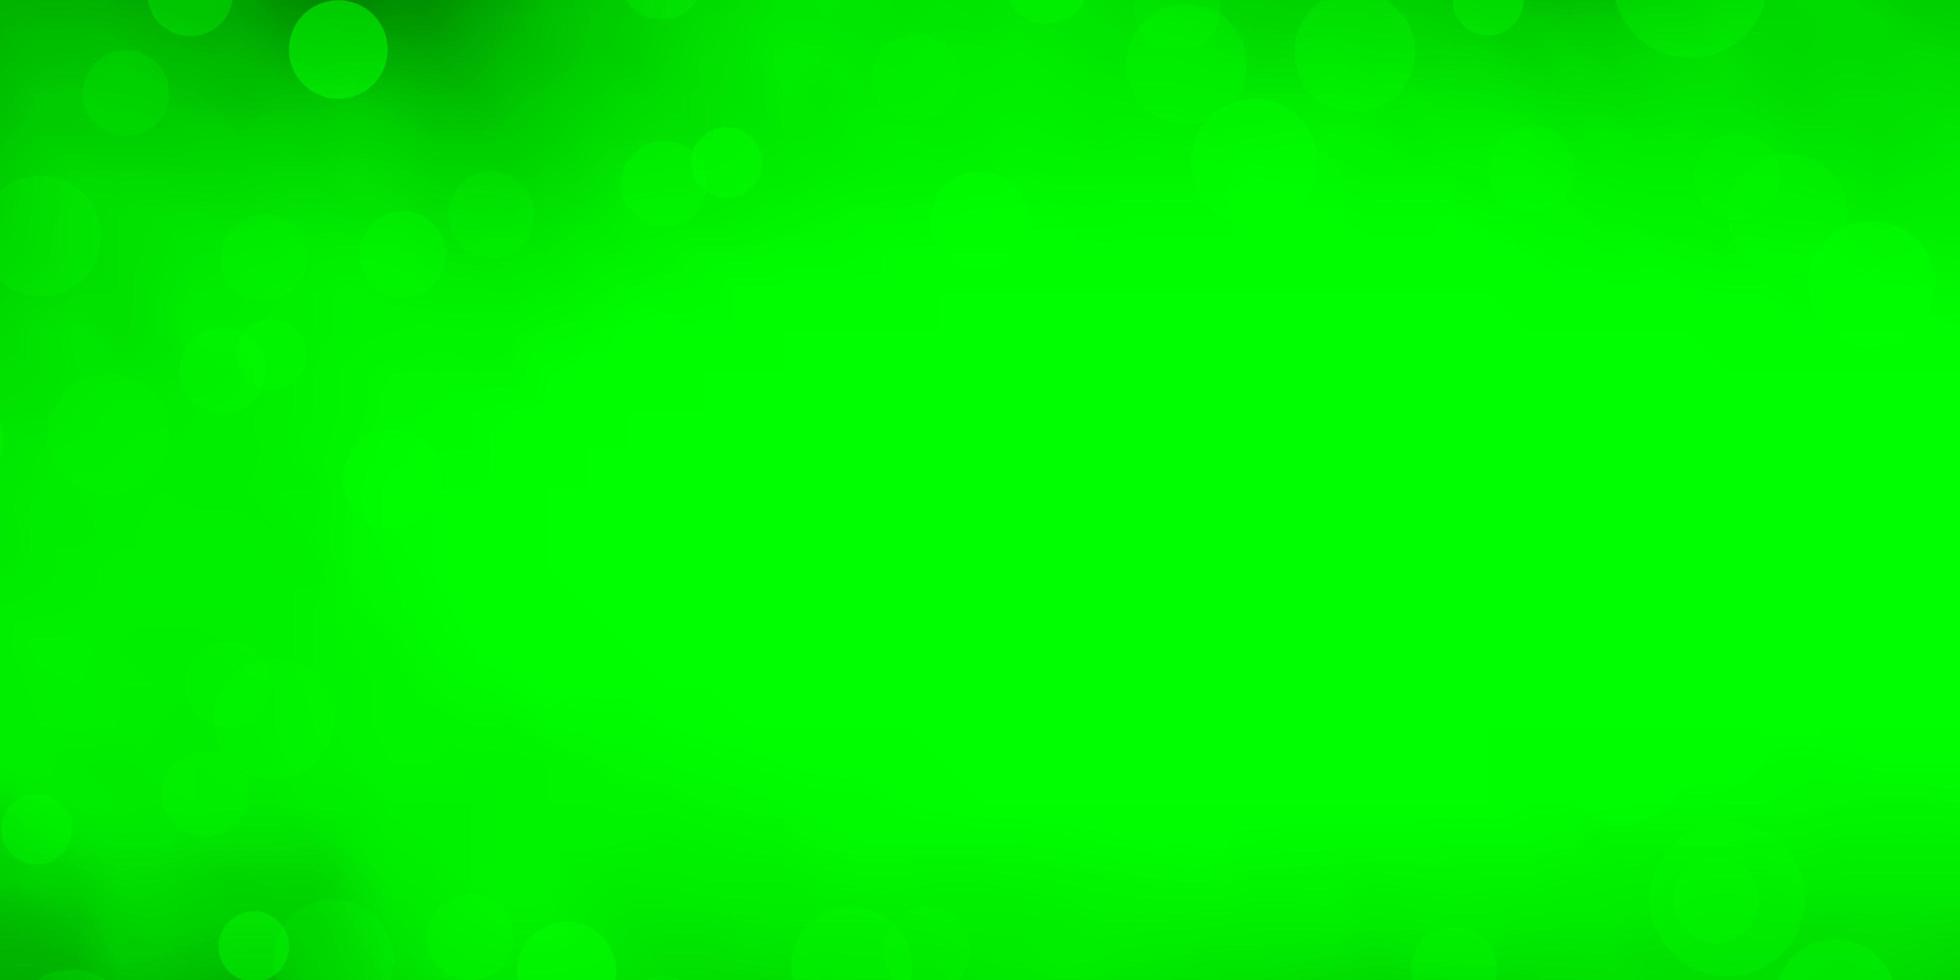 Light Green background with circles. vector